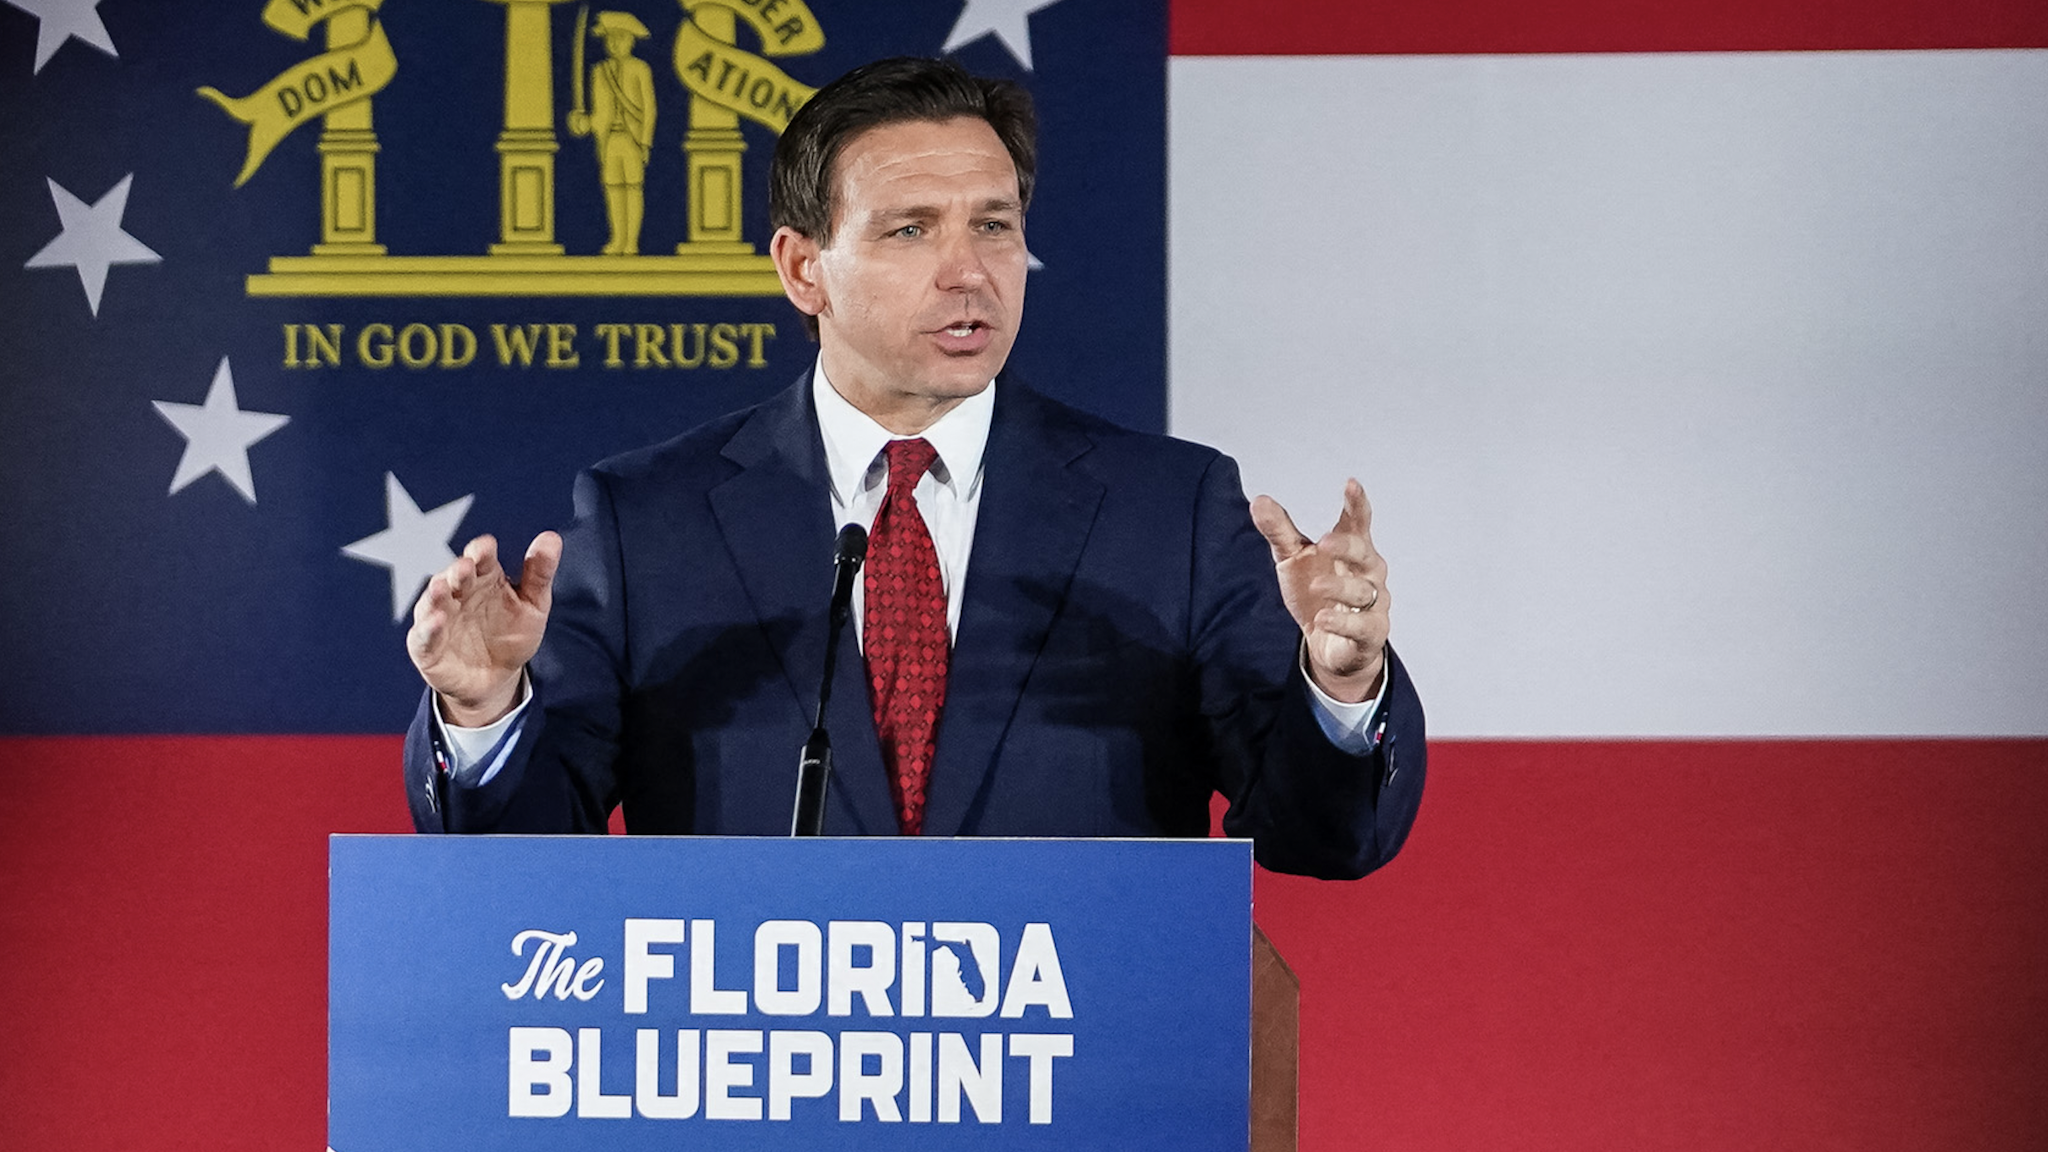 Florida Governor Ron DeSantis speaks during an event on his nationwide book tour at Adventure Outdoors, the largest gun store in the country, on March 30, 2023 in Smyrna, Georgia. - DeSantis is widely expected to enter the race for the Republican presidential nomination.